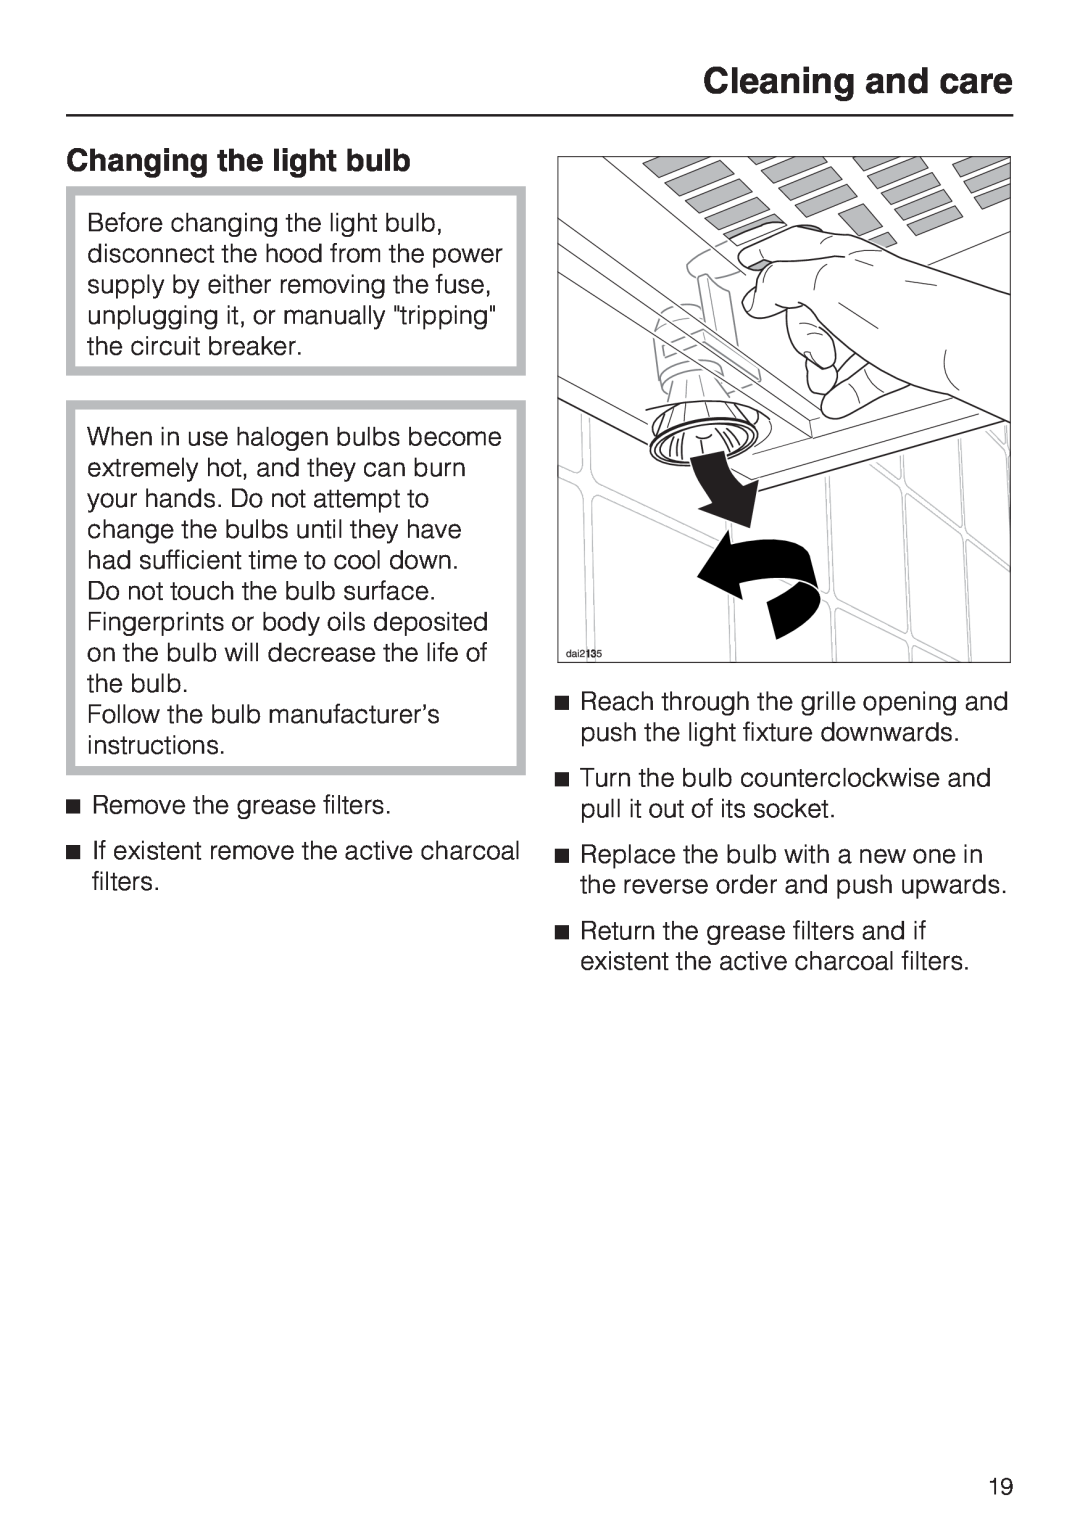 Miele DA2280, DA2210 installation instructions Changing the light bulb, Cleaning and care 